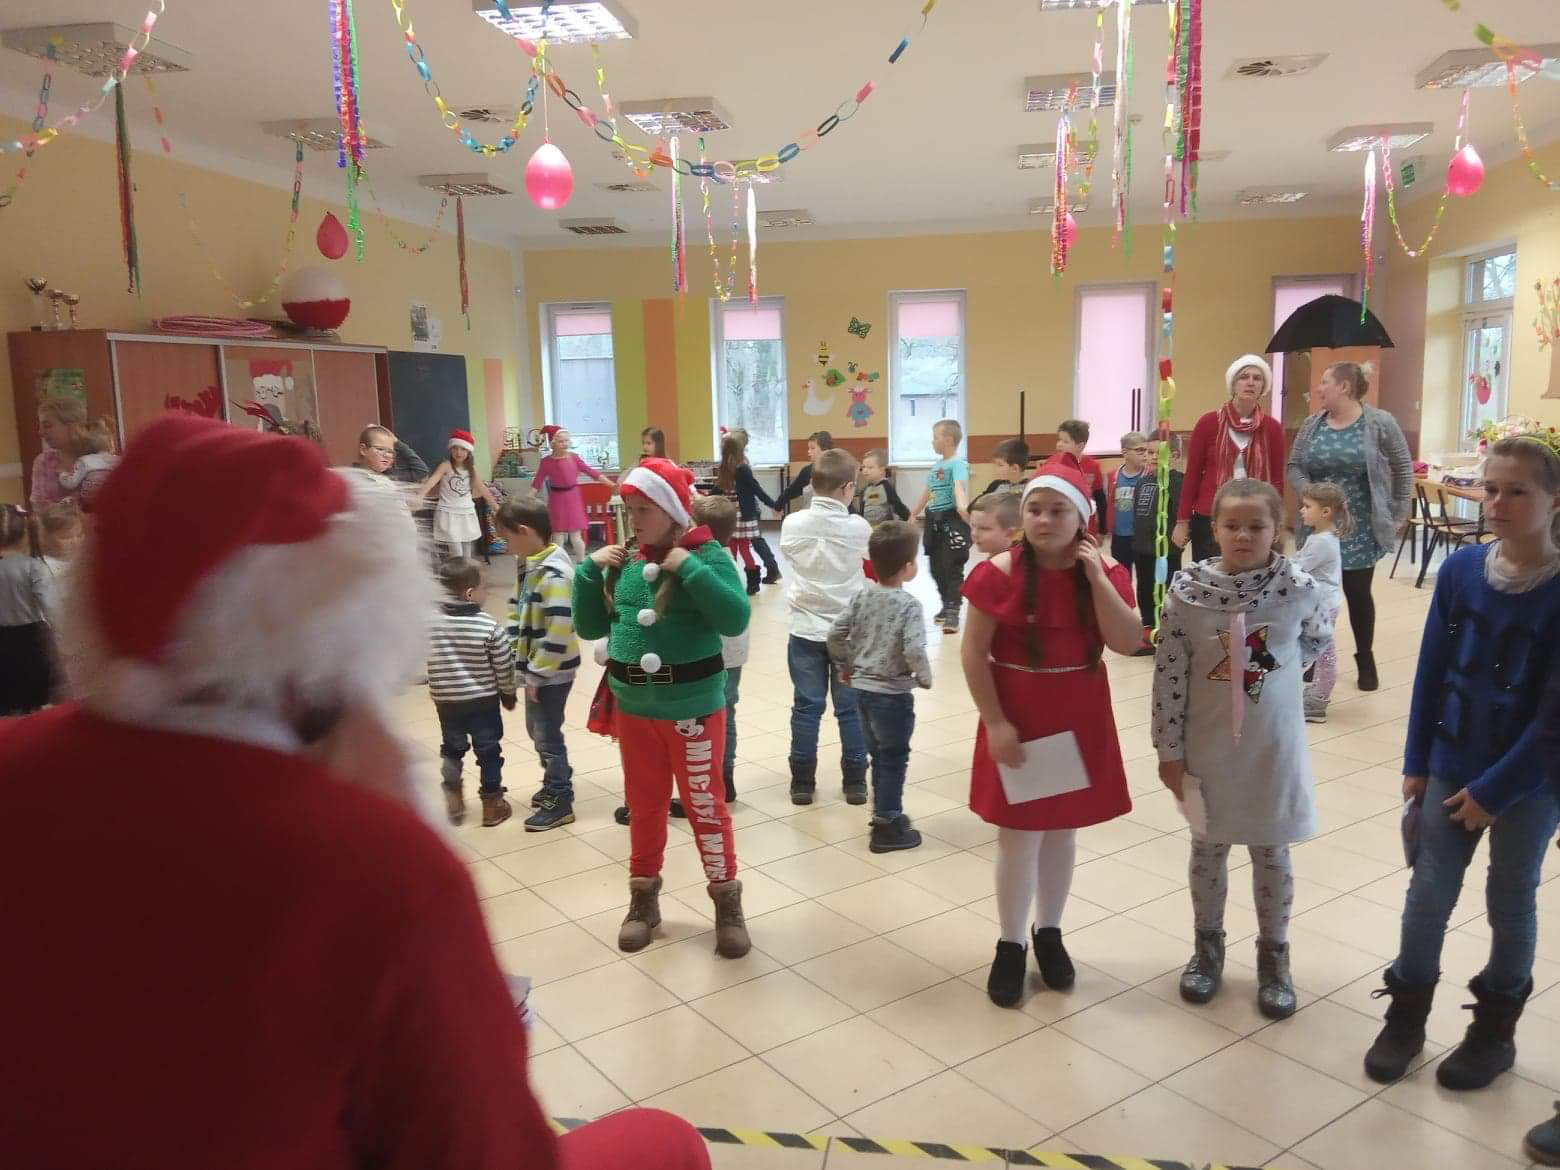 ‘Presents to Poland’ – Paladone’s yearly gift to the children of Szczecinek